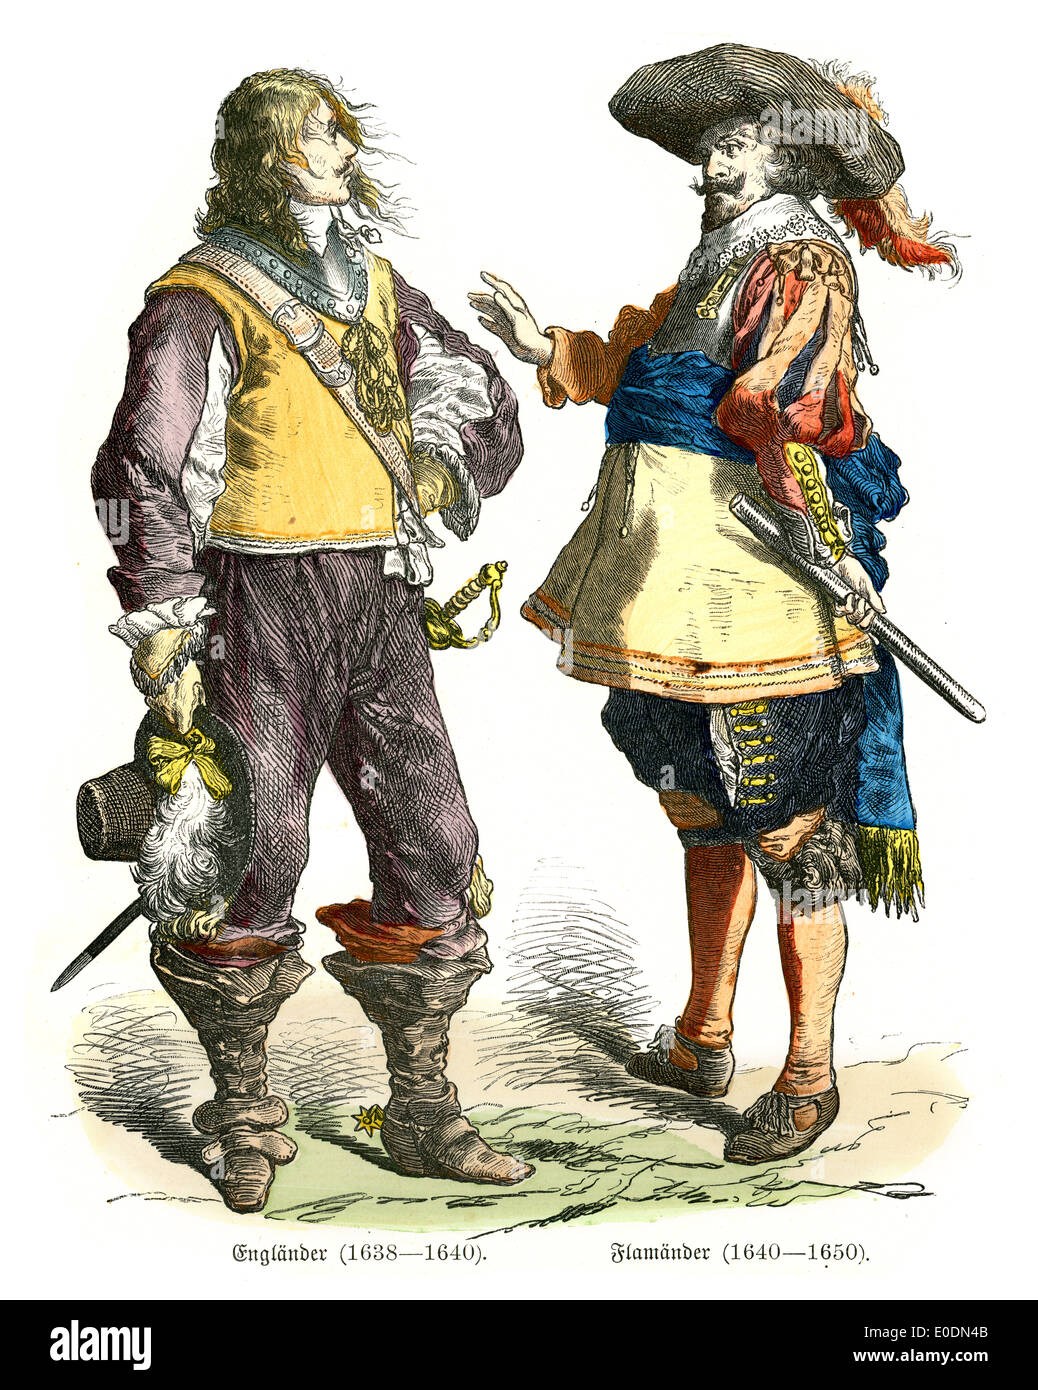 Traditional costumes of the 17th Century, Englishman and a Flemish man Stock Photo